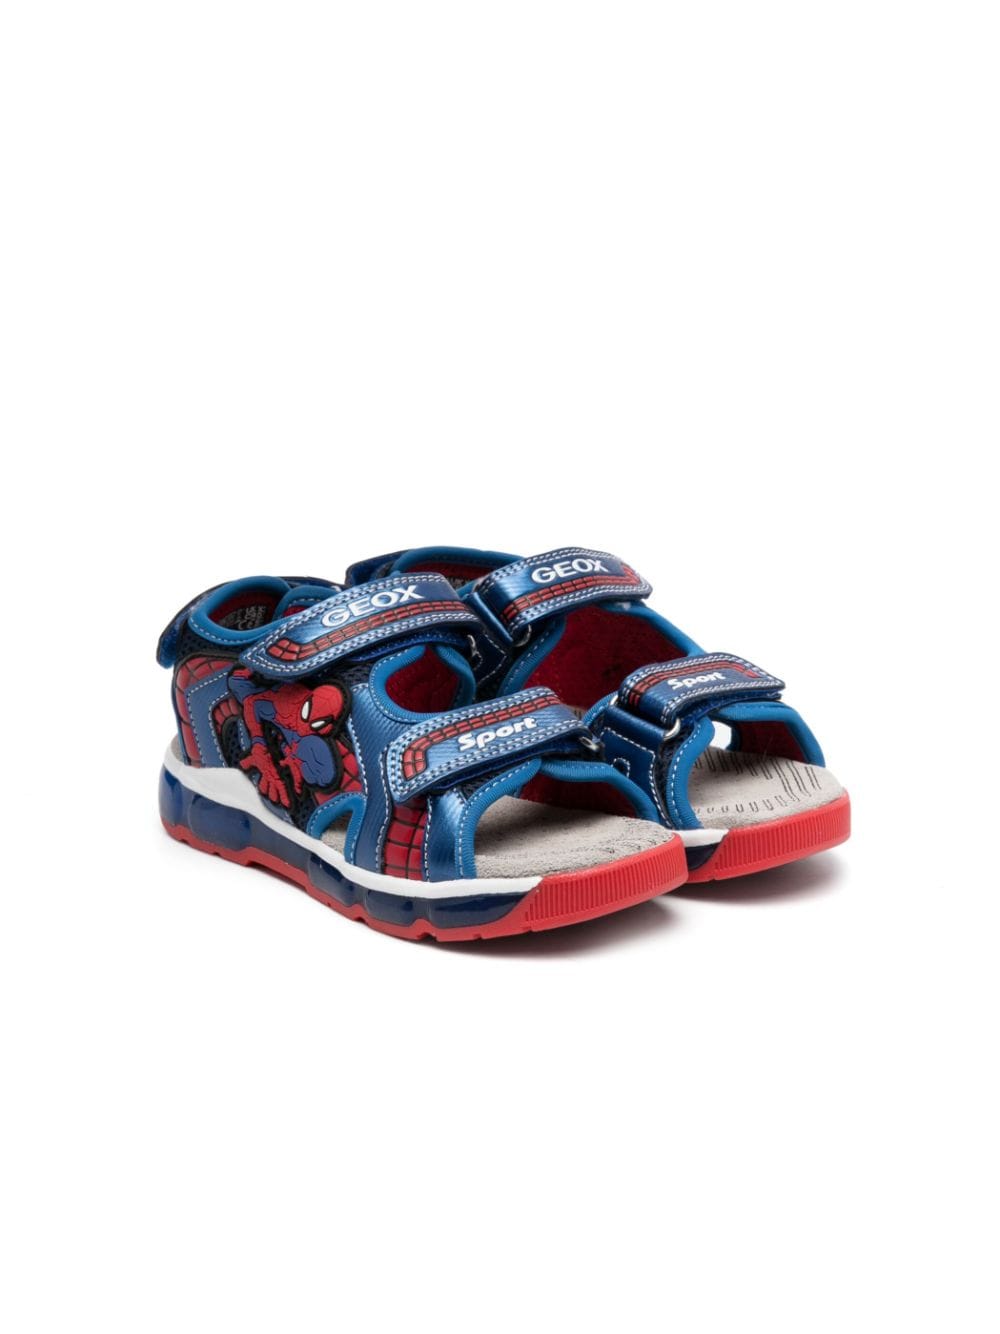 Geox x Marvel Android Sandals - Farfetch